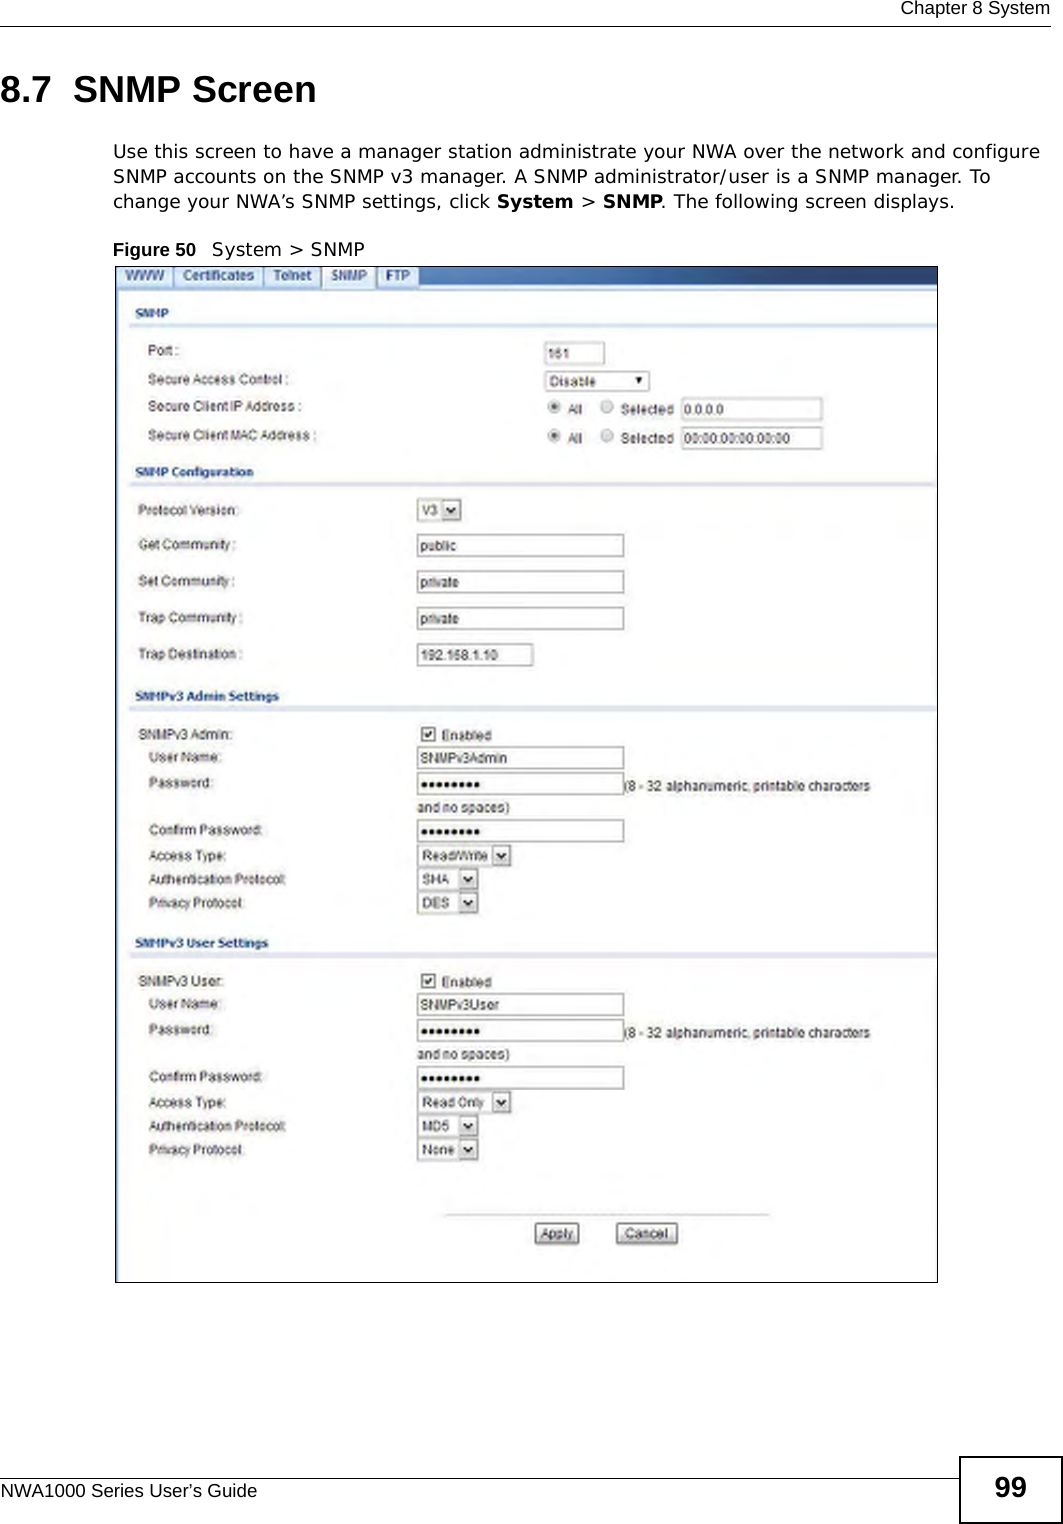  Chapter 8 SystemNWA1000 Series User’s Guide 998.7  SNMP ScreenUse this screen to have a manager station administrate your NWA over the network and configure SNMP accounts on the SNMP v3 manager. A SNMP administrator/user is a SNMP manager. To change your NWA’s SNMP settings, click System &gt; SNMP. The following screen displays.Figure 50   System &gt; SNMP